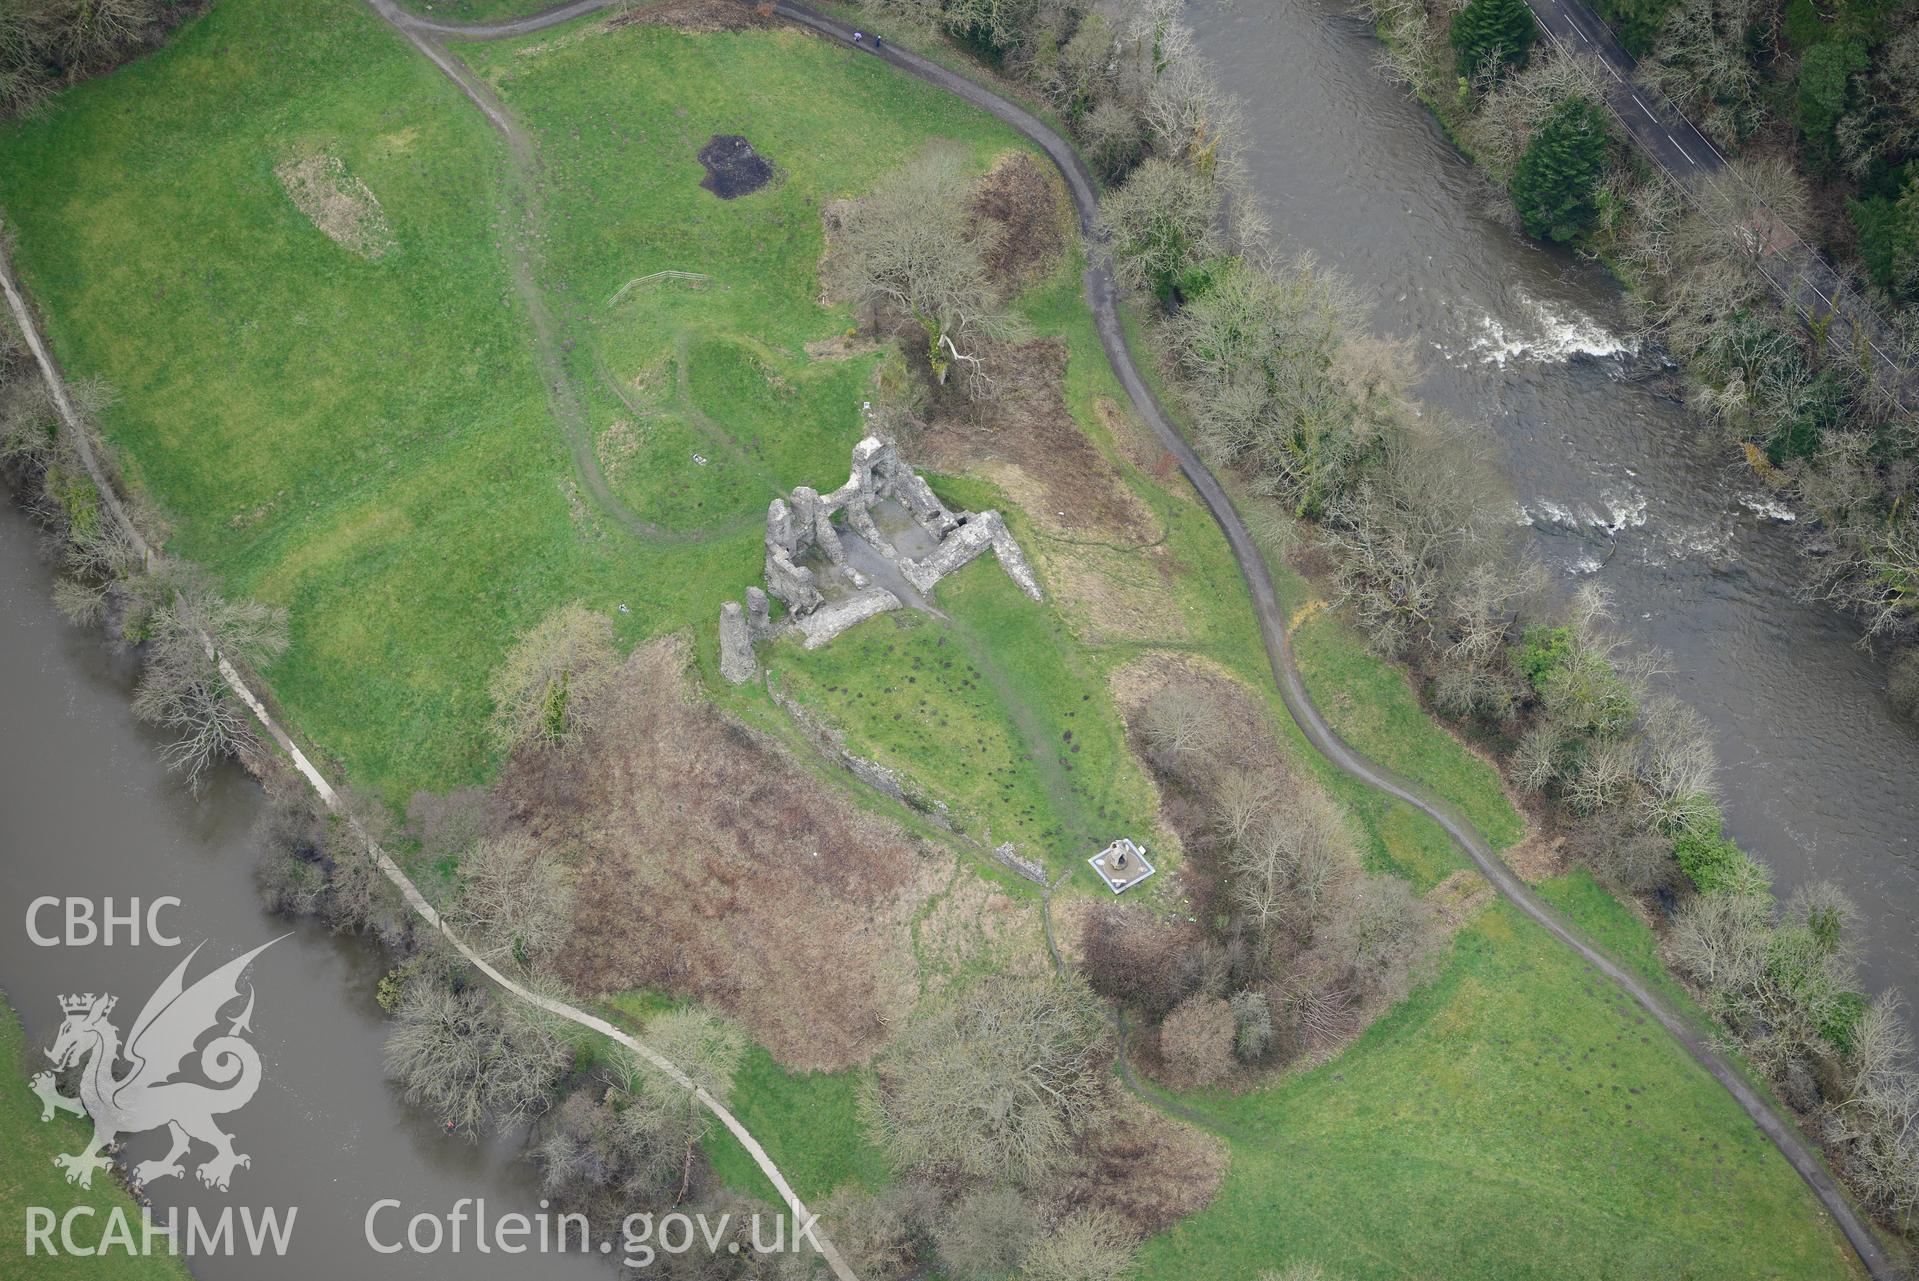 Newcastle Emlyn castle. Oblique aerial photograph taken during the Royal Commission's programme of archaeological aerial reconnaissance by Toby Driver on 13th March 2015.